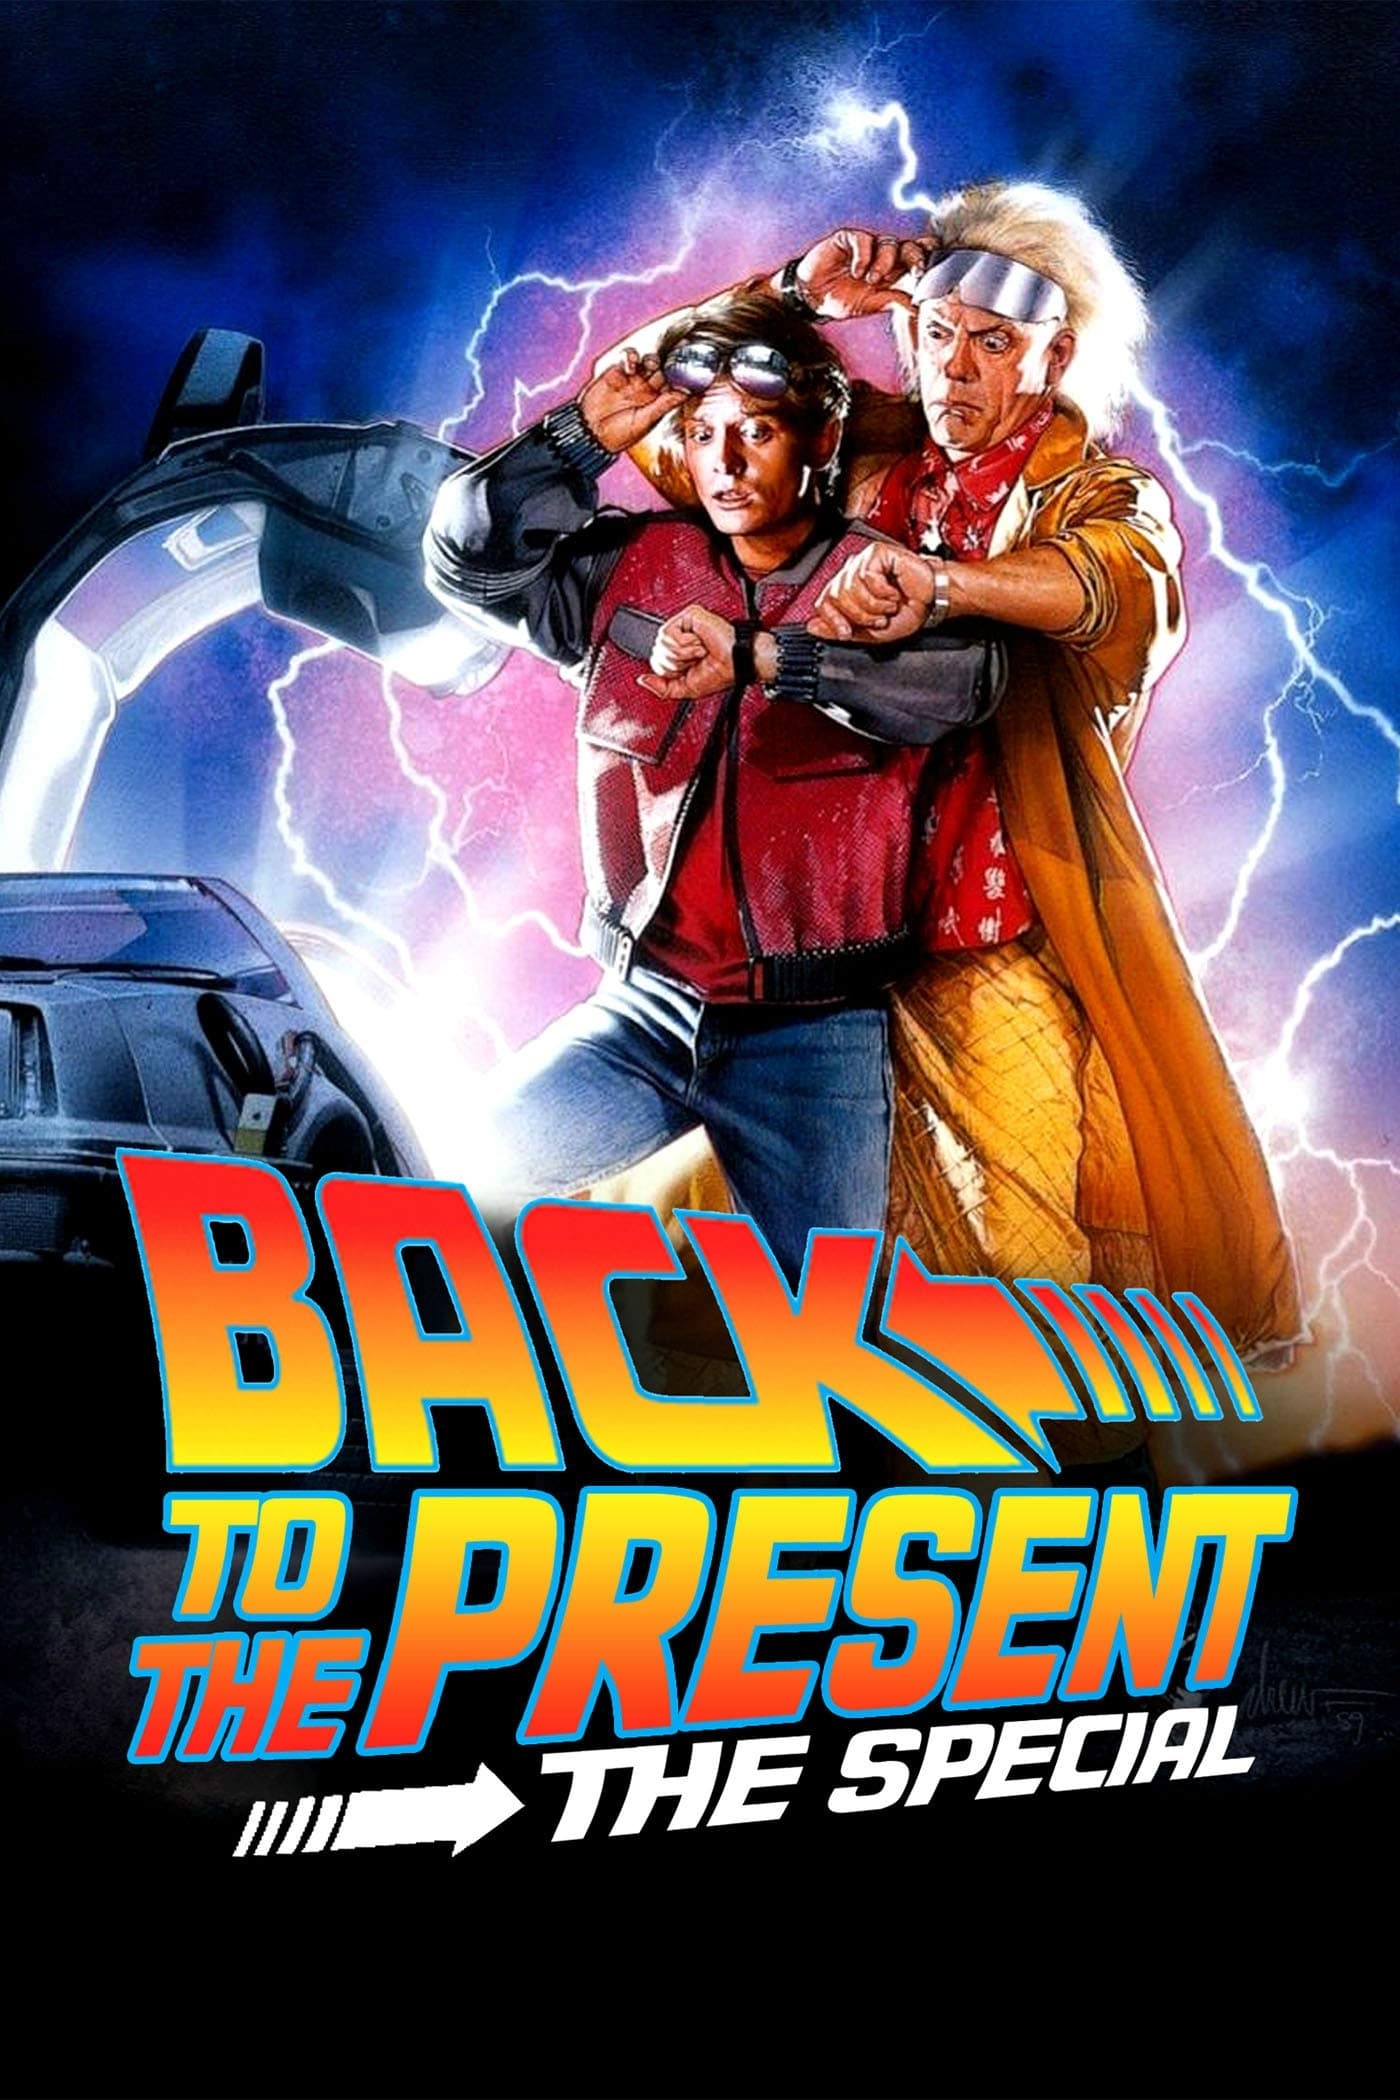 Back To the Present: The Special (2015)